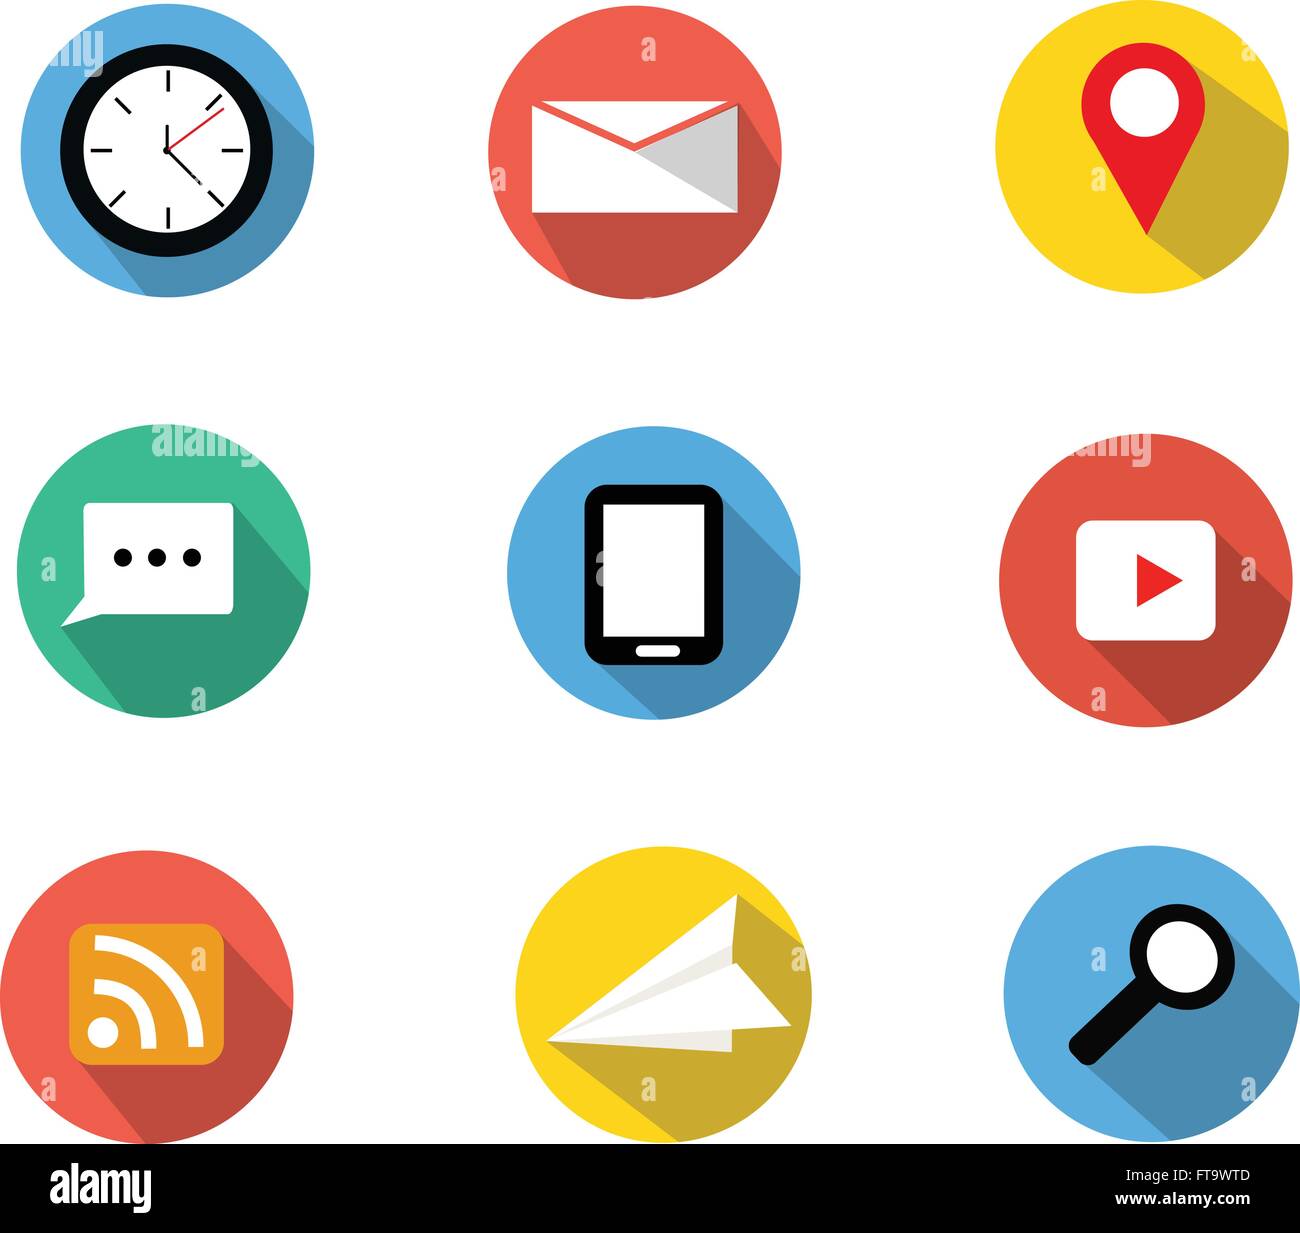 Flat icons set contain clock,e-mail,location,chat,smart-phone,video clips,rss feed,paper plane,search Stock Vector